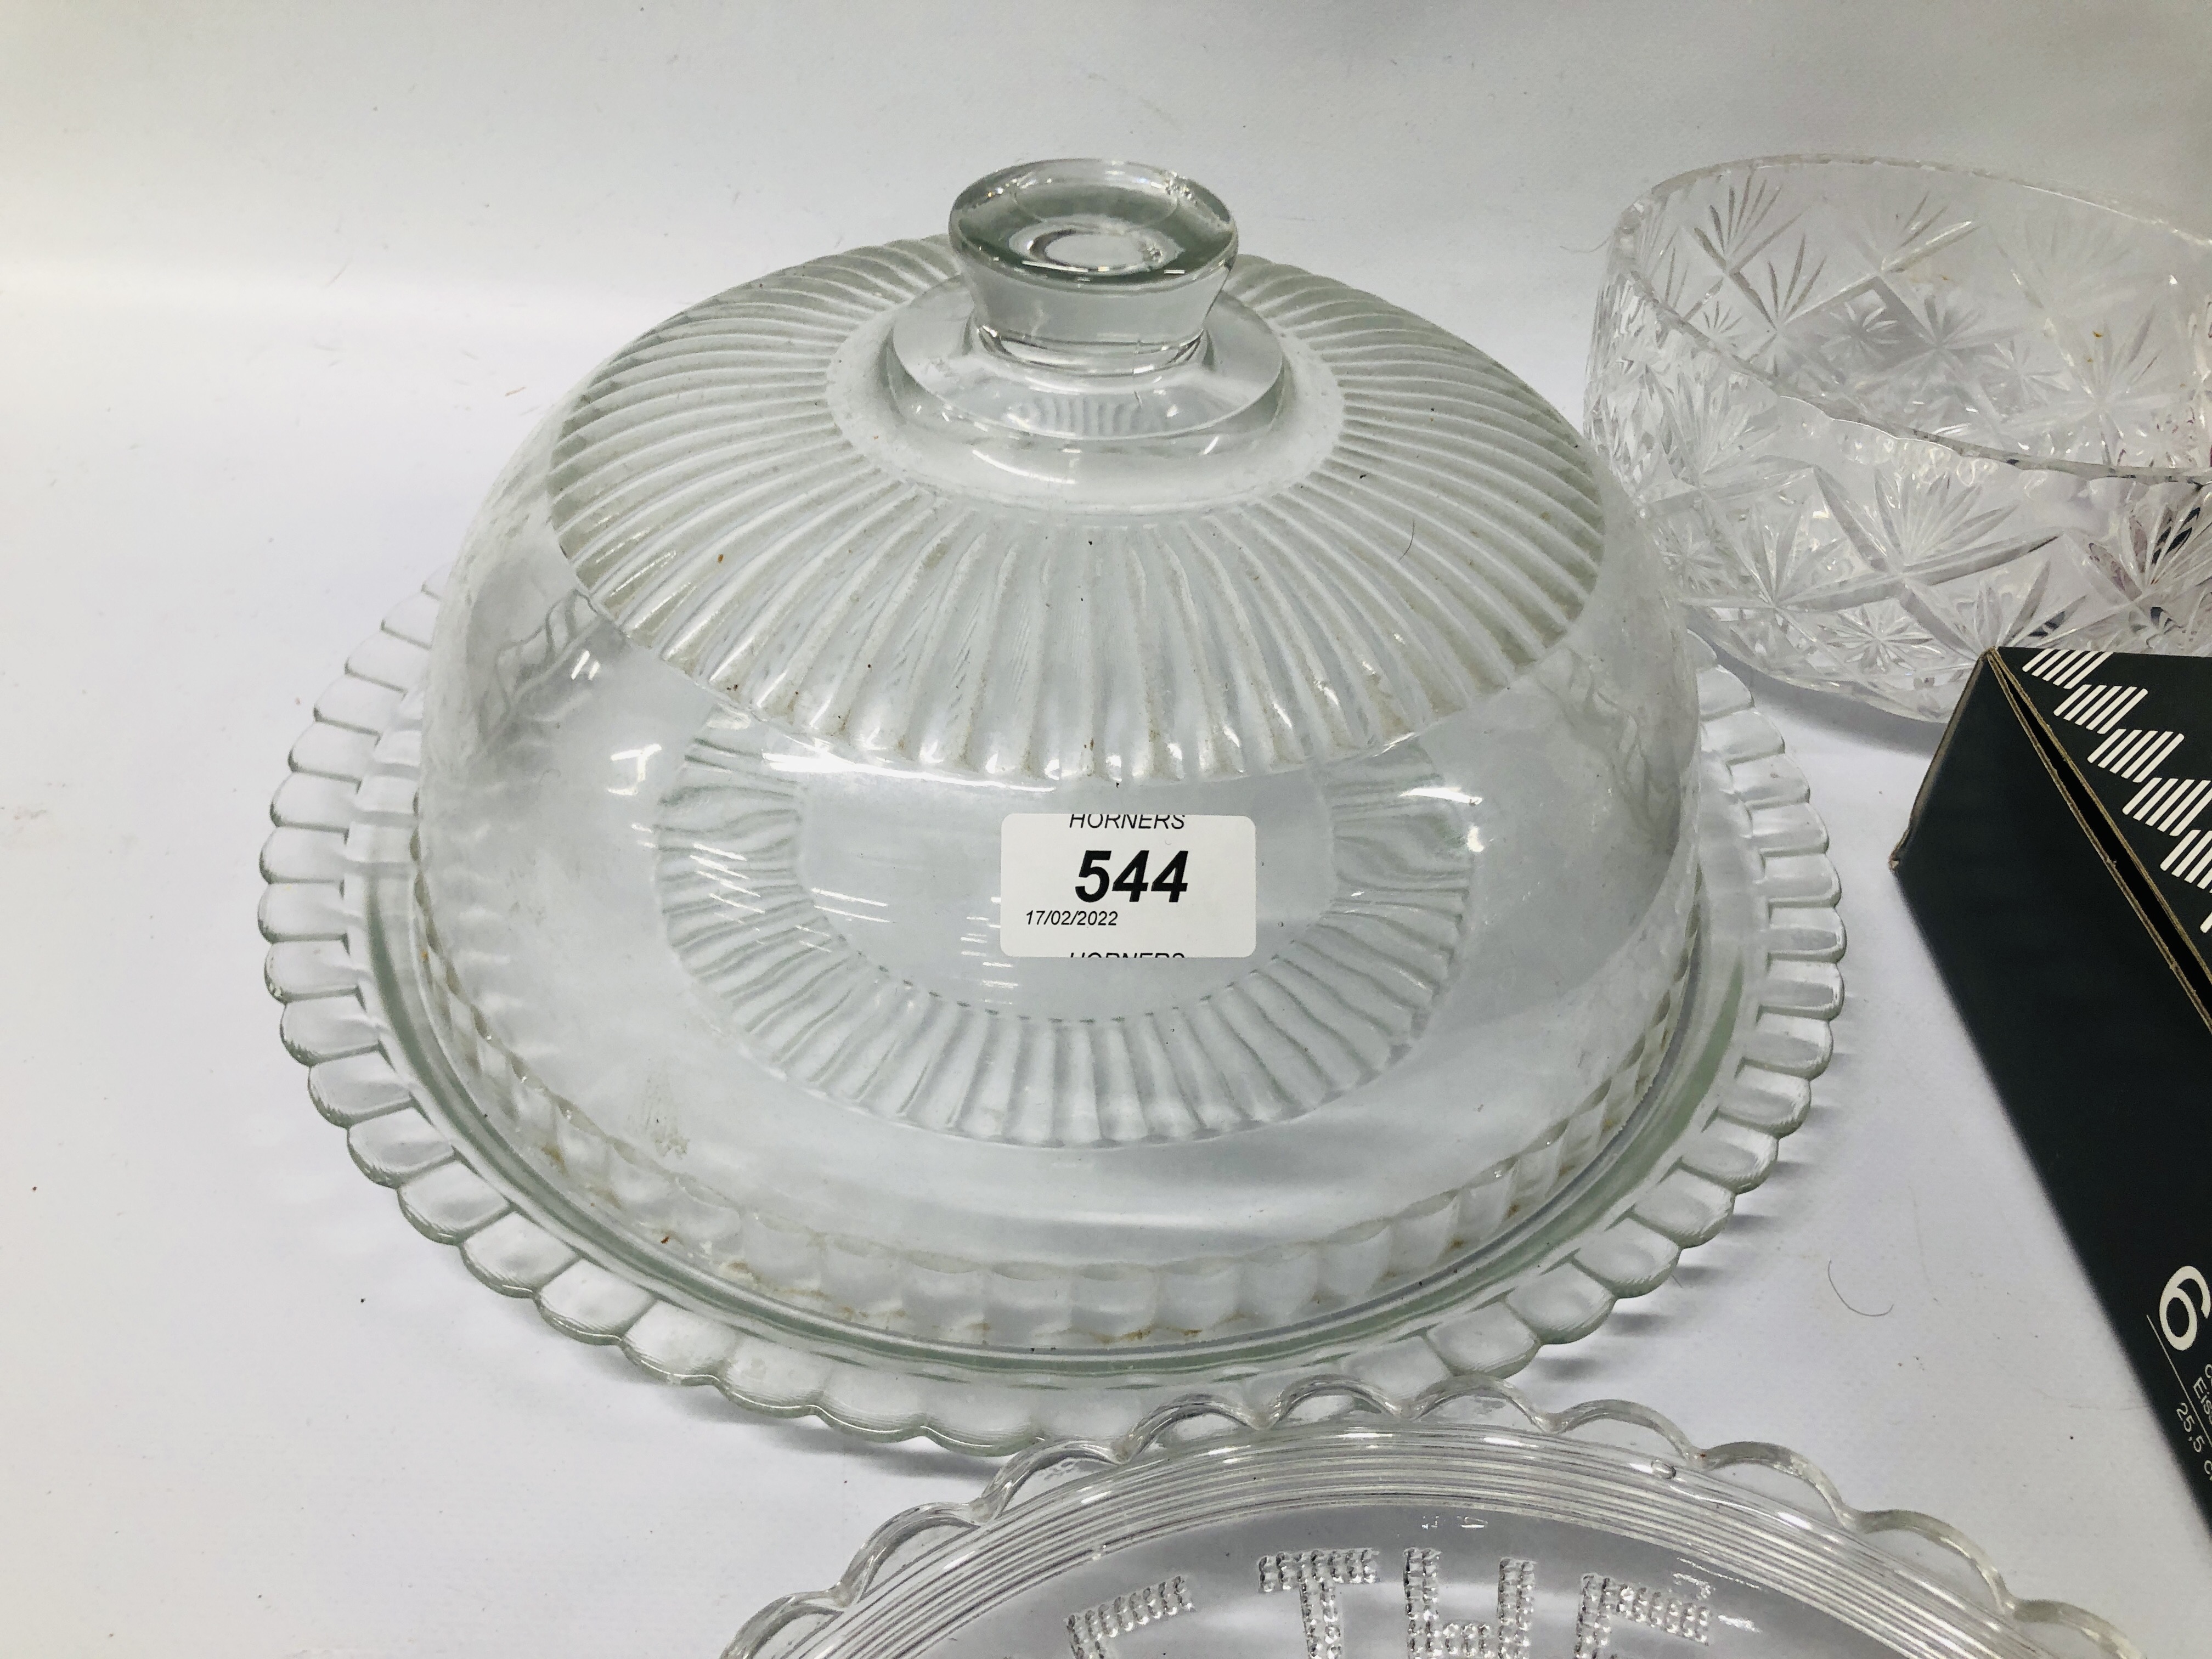 DECORATIVE GLASS CAKE PLATE AND COVER, GLASS CORONATION PLATE, - Image 6 of 7